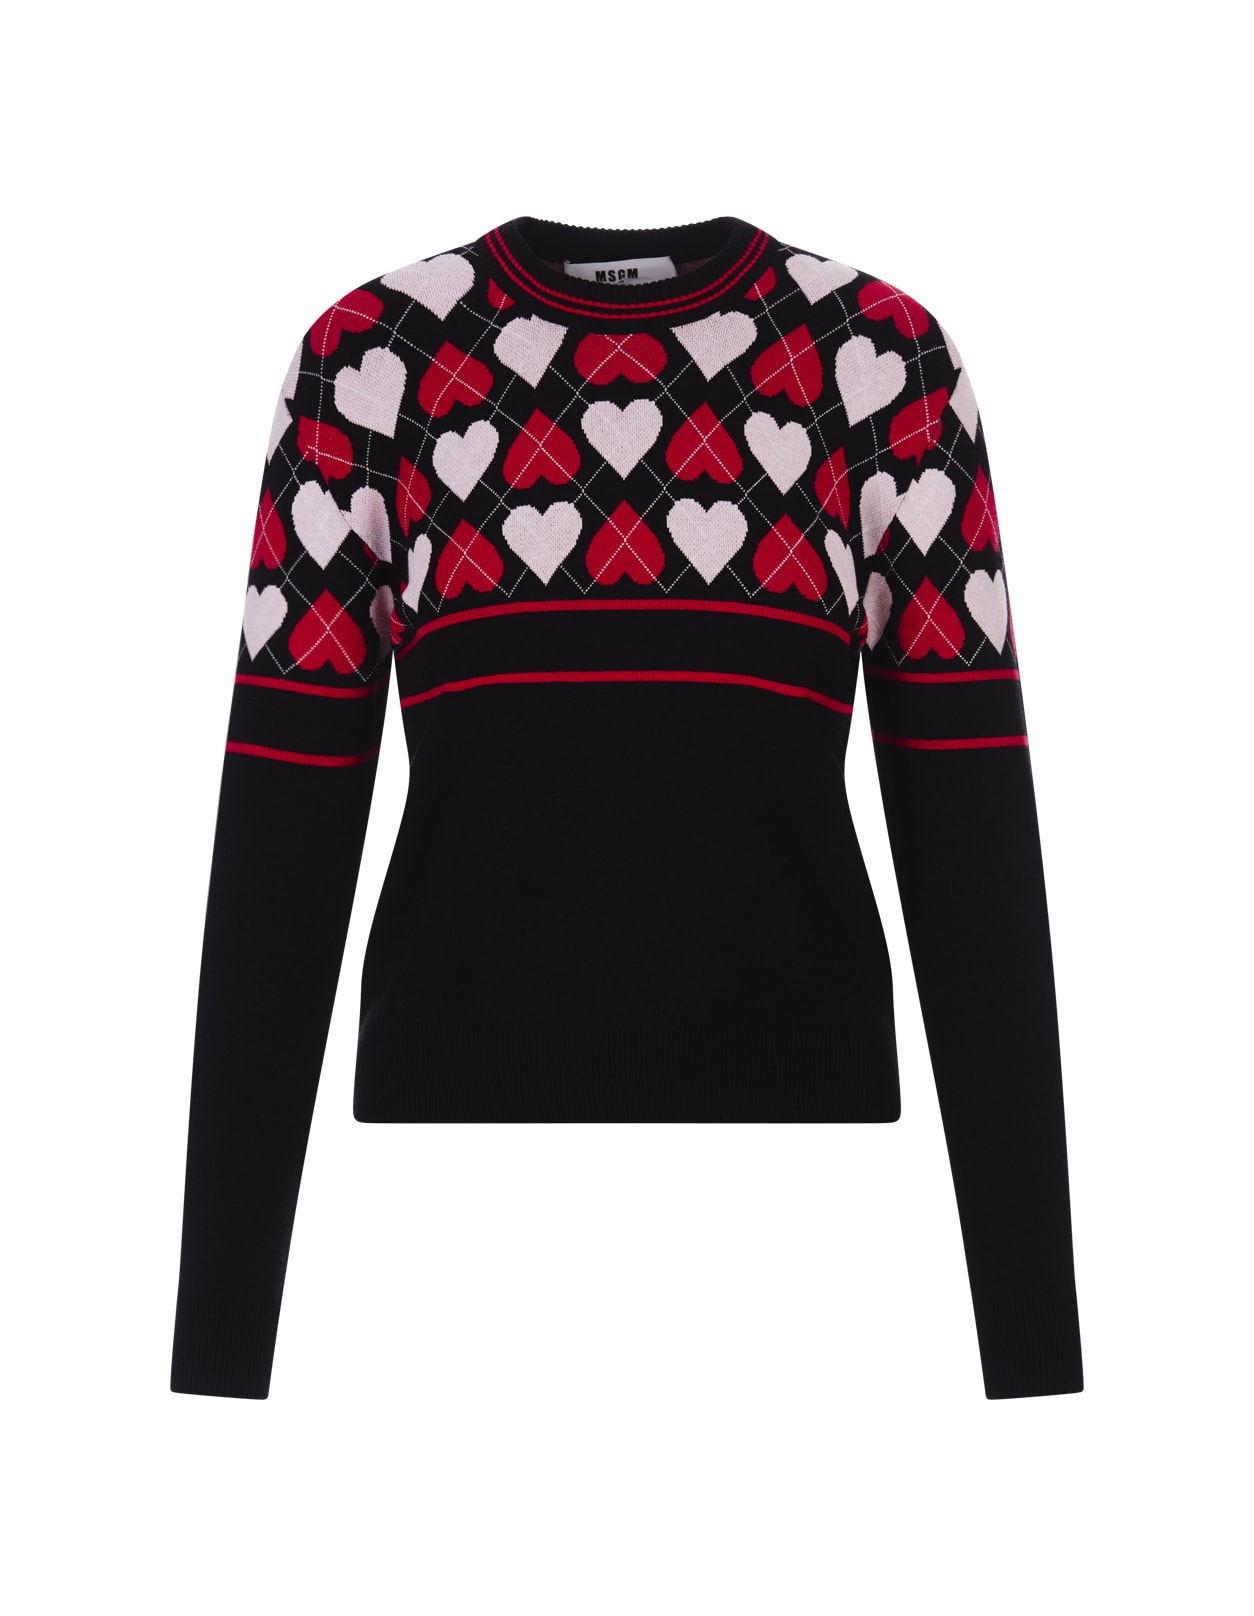 MSGM BLACK jumper WITH ACTIVE HEARTS MOTIF